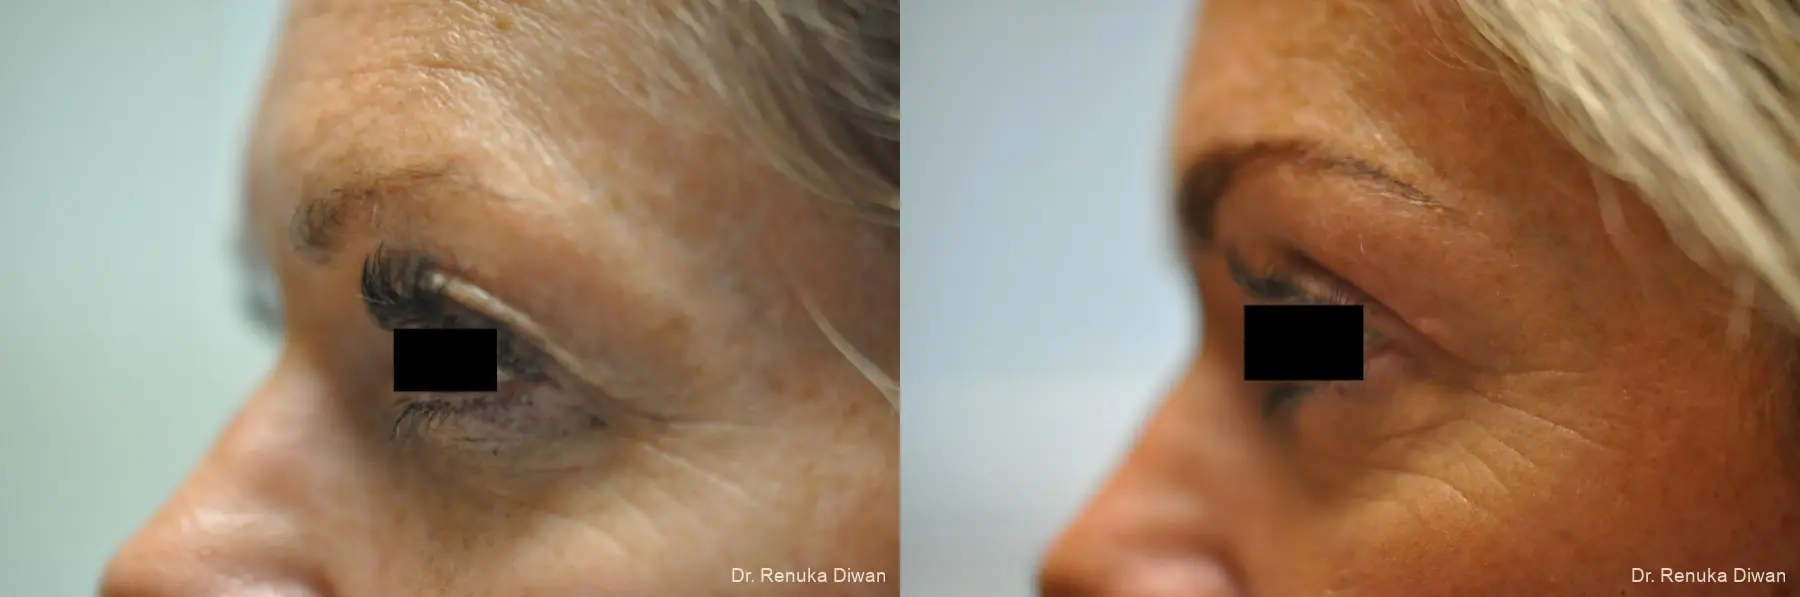 Blepharoplasty: Patient 1 - Before and After  